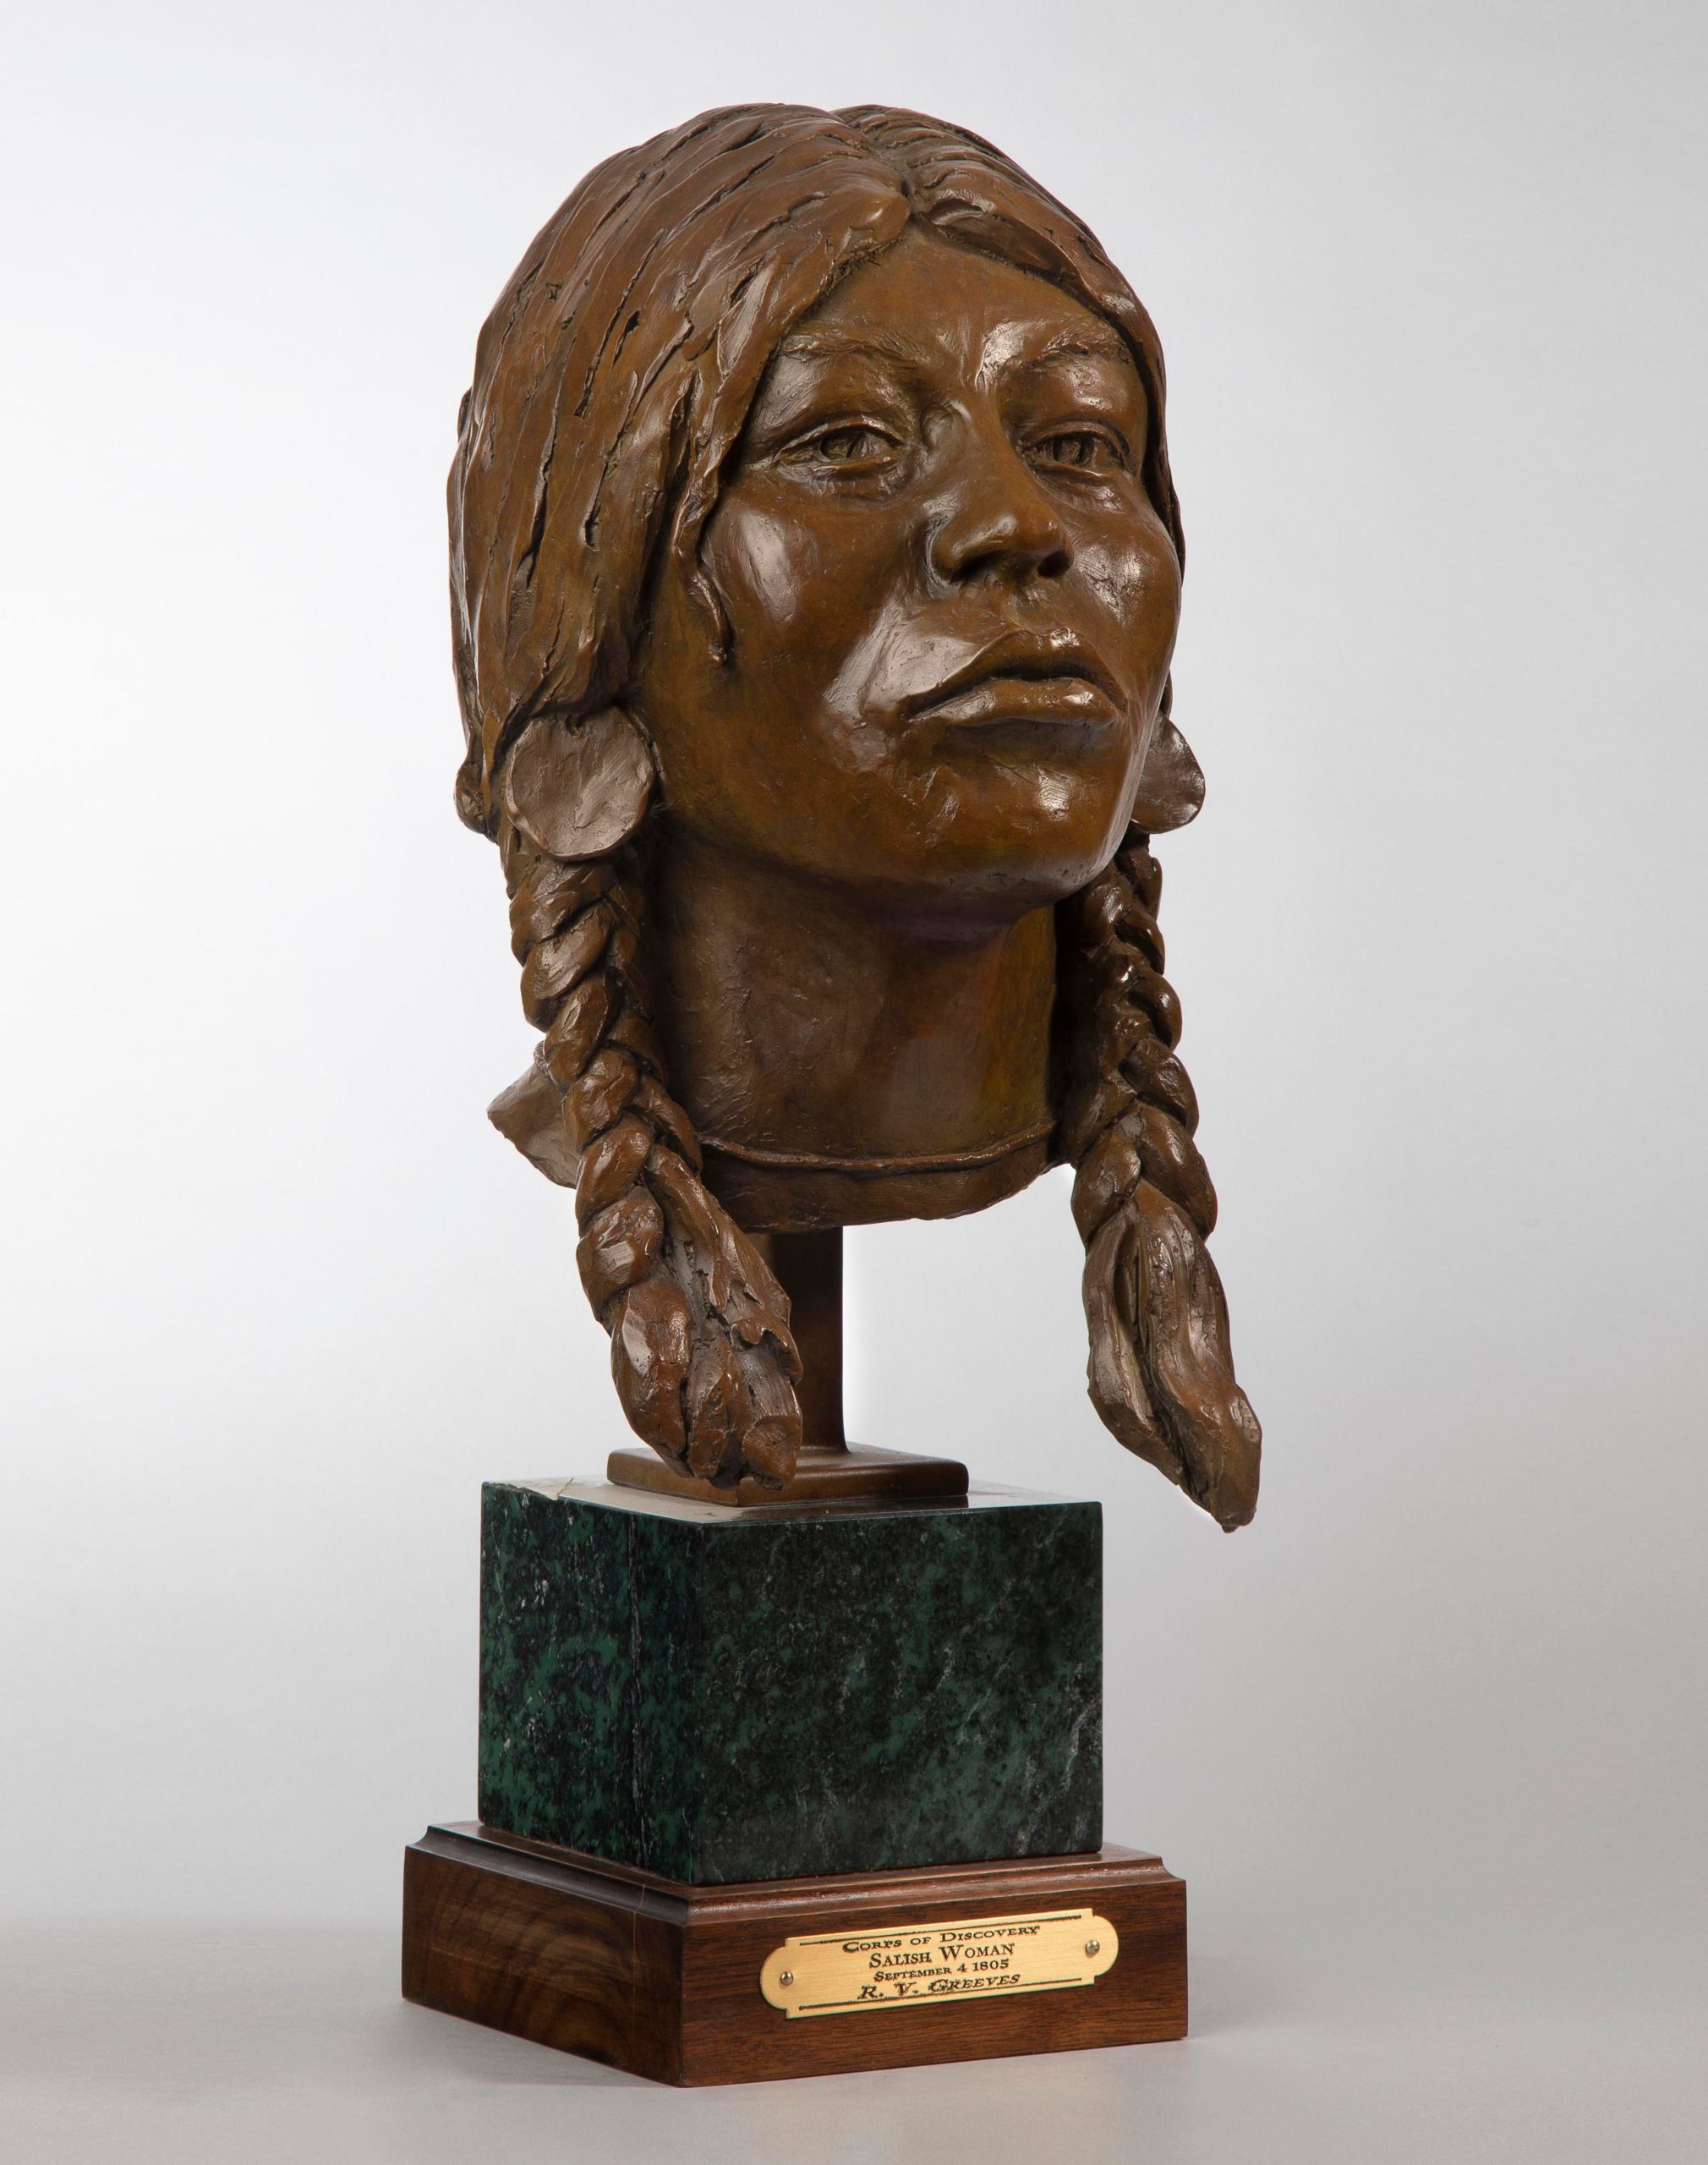 

											Richard V. Greeves </b>

											<em>
												 Lewis & Clark, Corp of Discovery, 1804-1806: The Native Peoples Lewis & Clark Encountered on their Epic Journey</em> 

											<h4>
												August 6 - October 30, 2021											</h4>

		                																																													<i>Salish Woman,</i>  
																																																					bronze, 
																																								17 x 7 x 6 inches 
																								
		                				